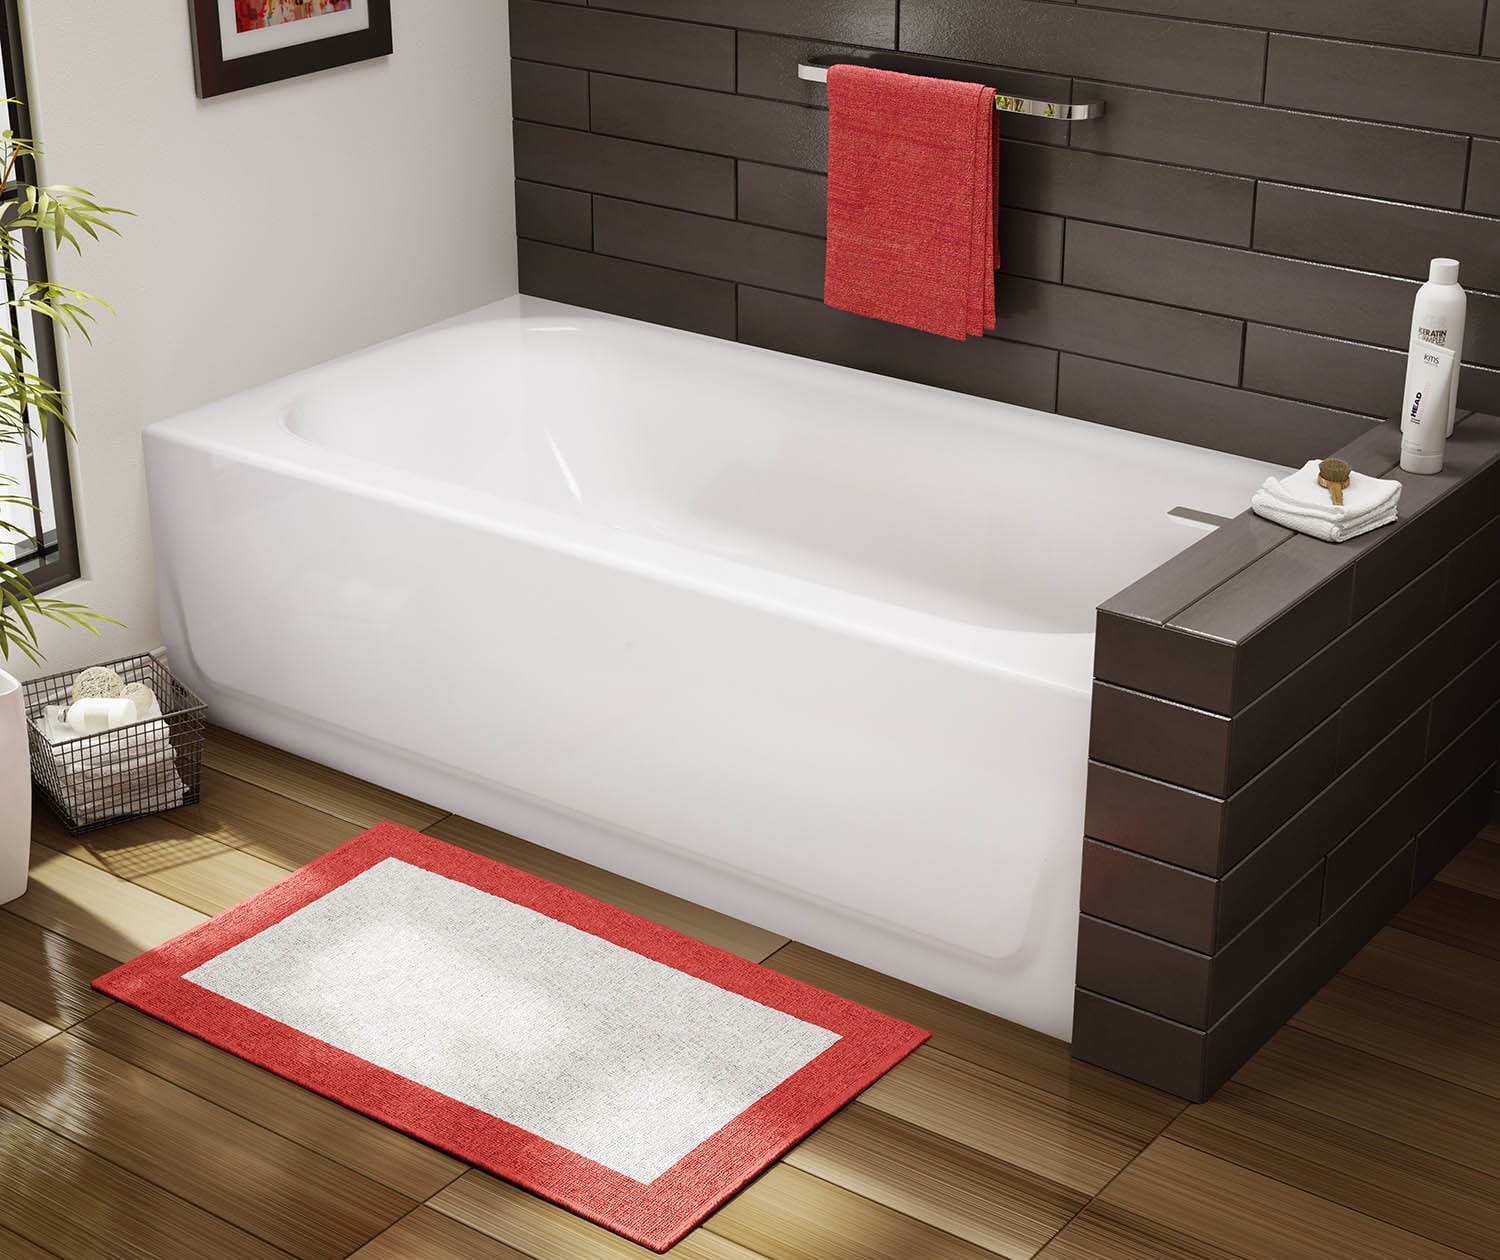 Mansfield Pro-Fit Steel XD 30-in W x 60-in L White Porcelain Enameled Steel  Rectangular Right Drain Alcove Soaking Bathtub in the Bathtubs department  at